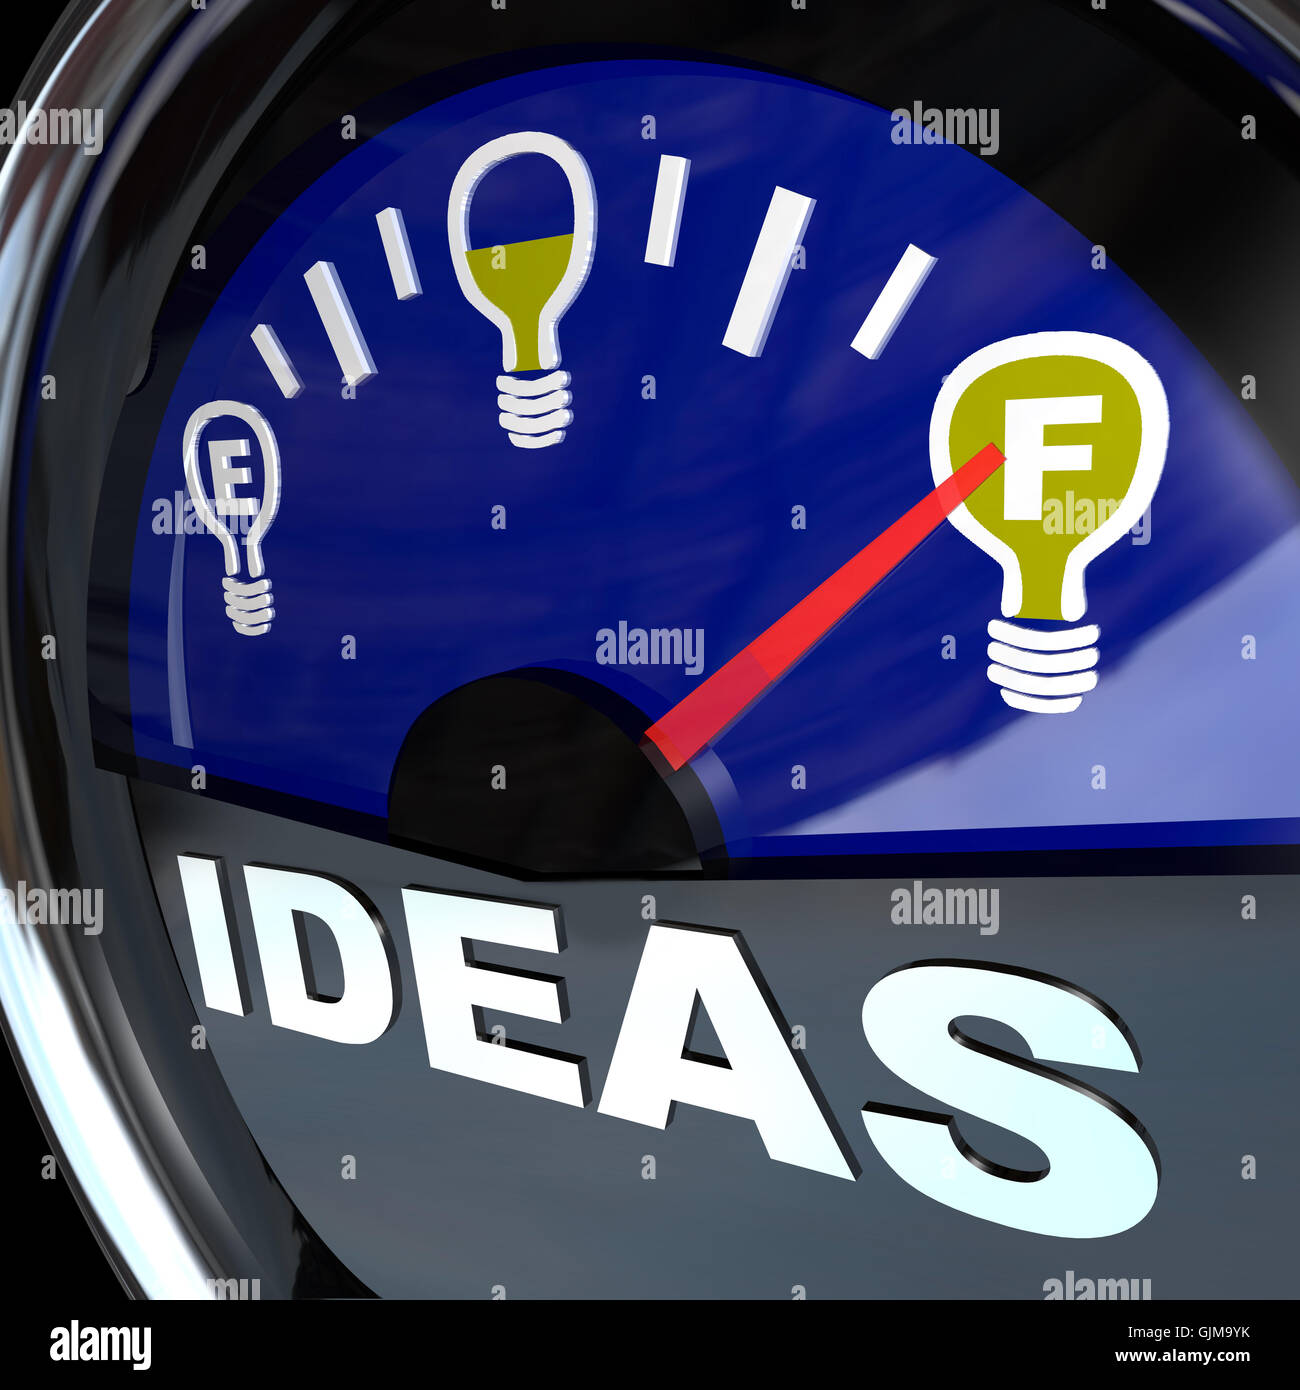 Full of Ideas - Innovation Fuel Gauge for Success Stock Photo